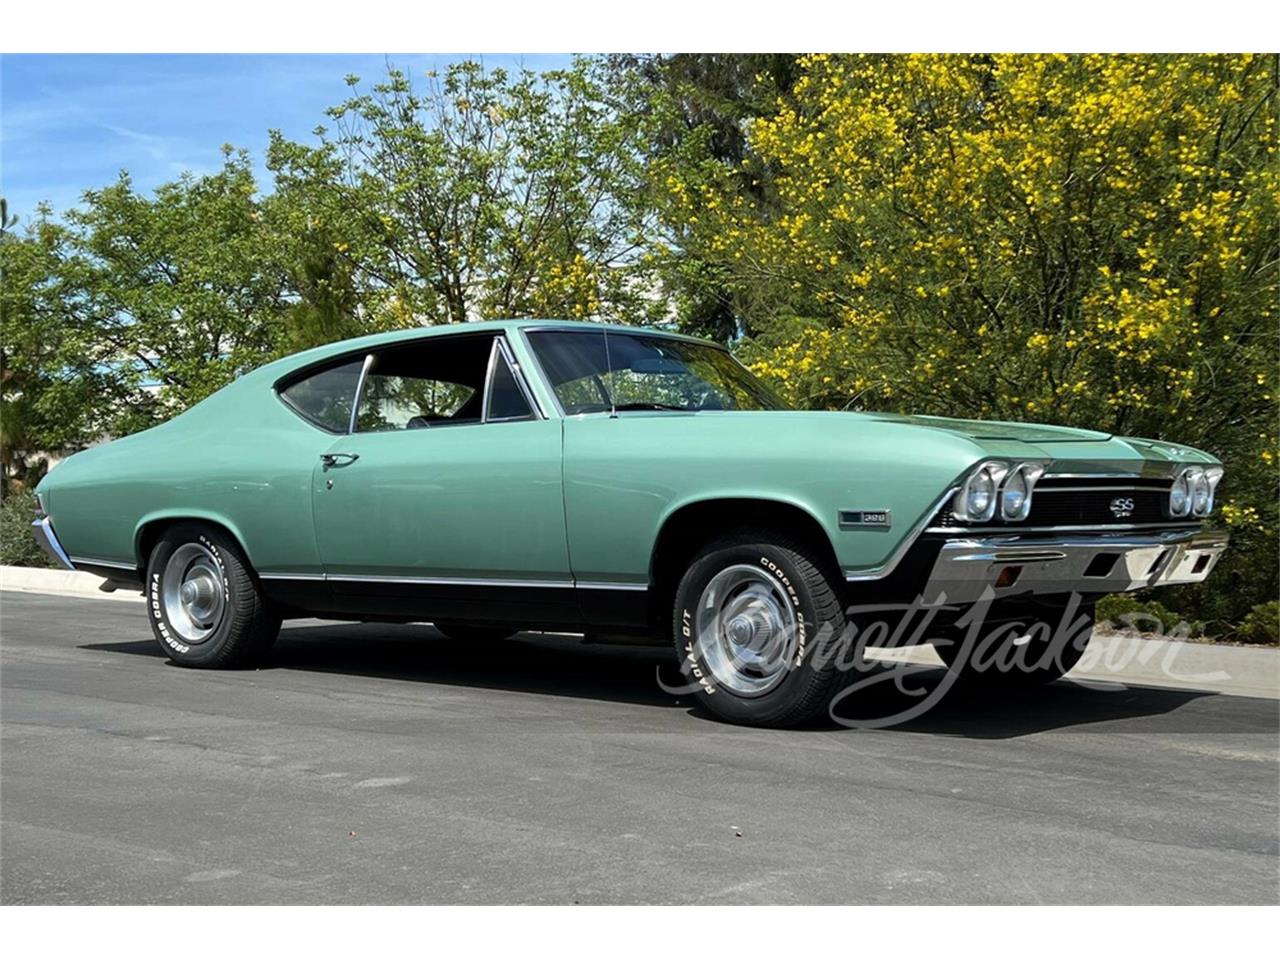 For Sale at Auction: 1968 Chevrolet Chevelle SS in Las Vegas, Nevada for sale in Las Vegas, NV